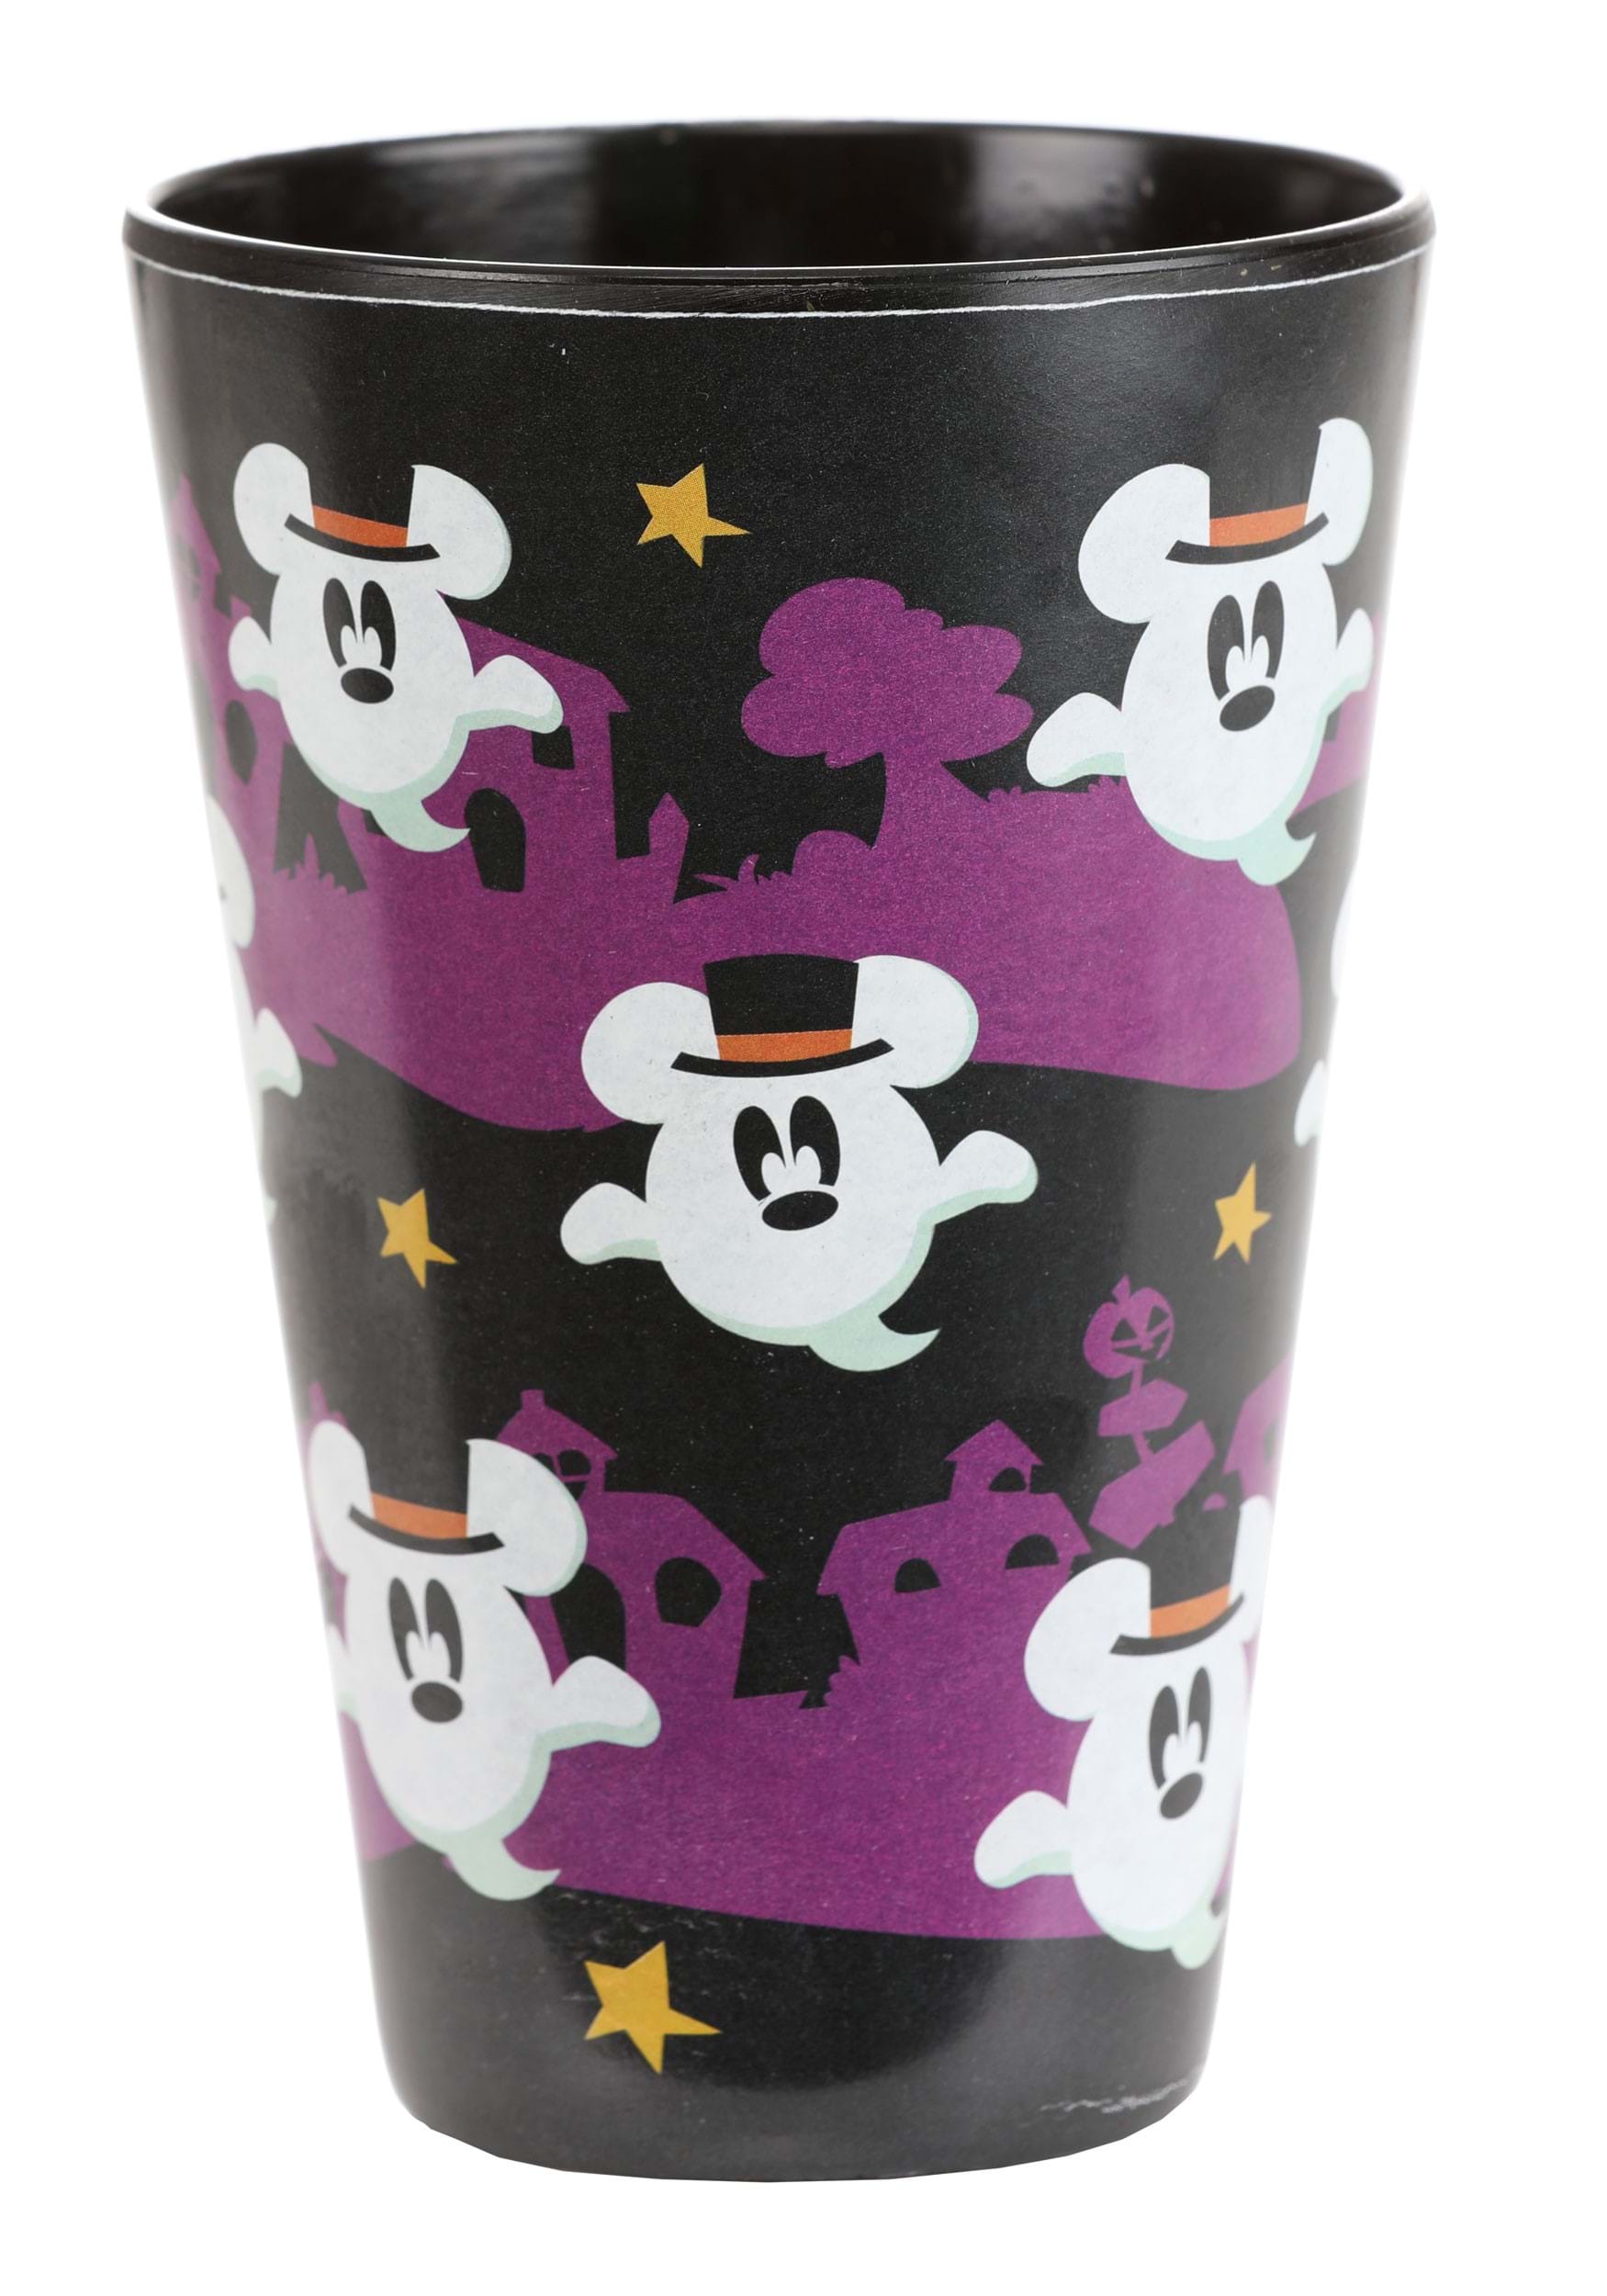 https://images.fun.com/products/88722/2-1-295651/disney-mickeyghost-black-bamboo-tumblers-4-piece-s-alt-1.jpg